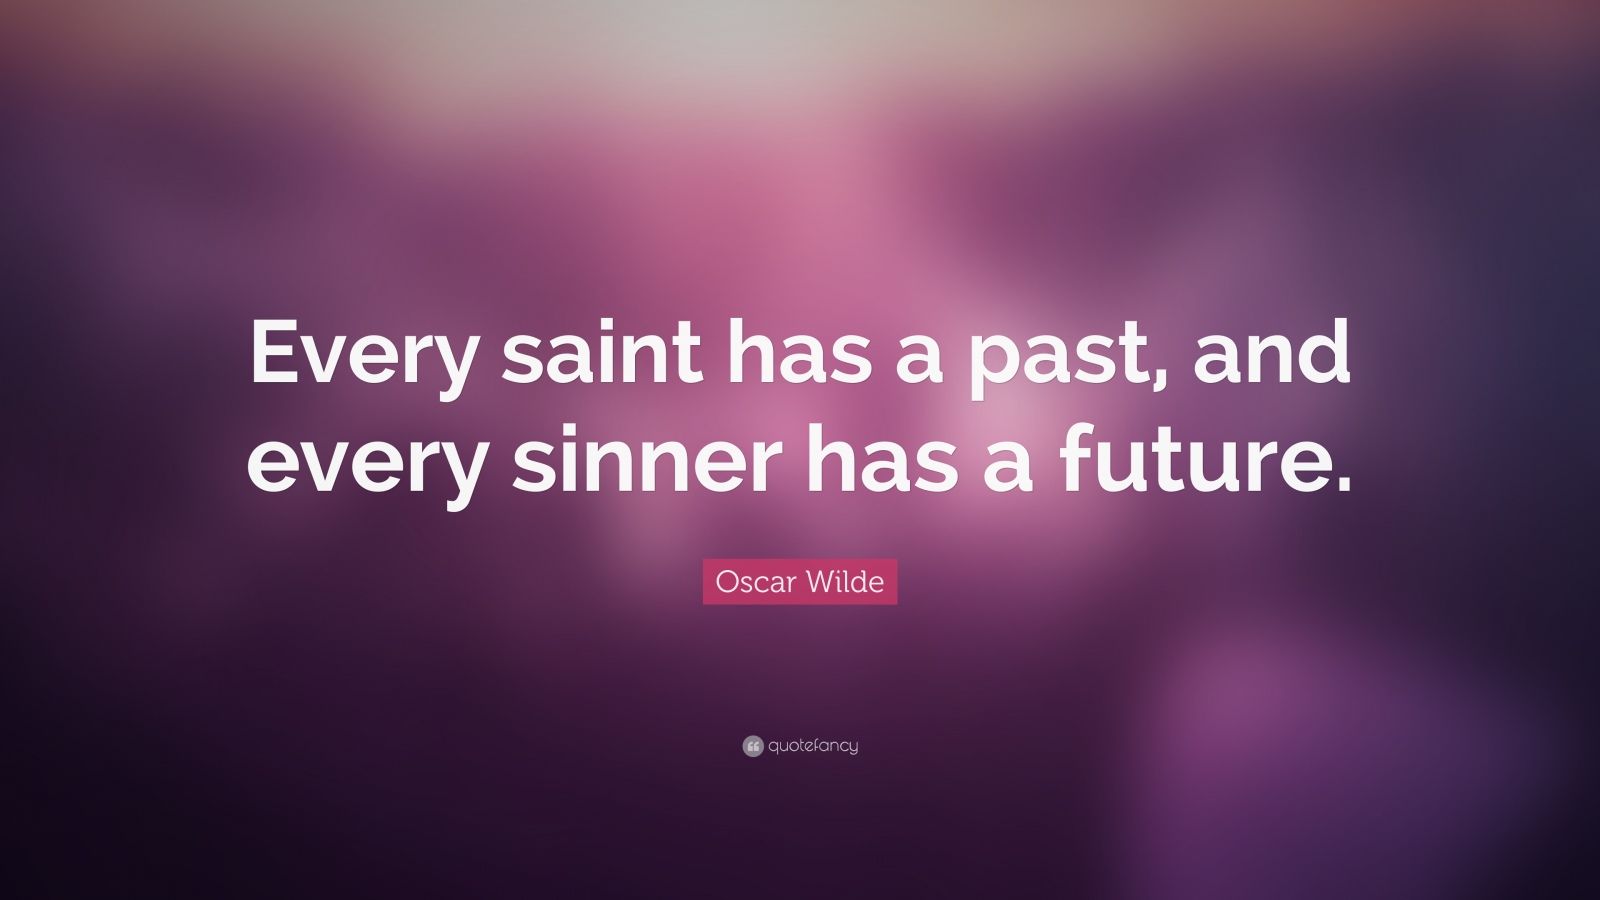 Oscar Wilde Quote: “Every saint has a past, and every sinner has a ...